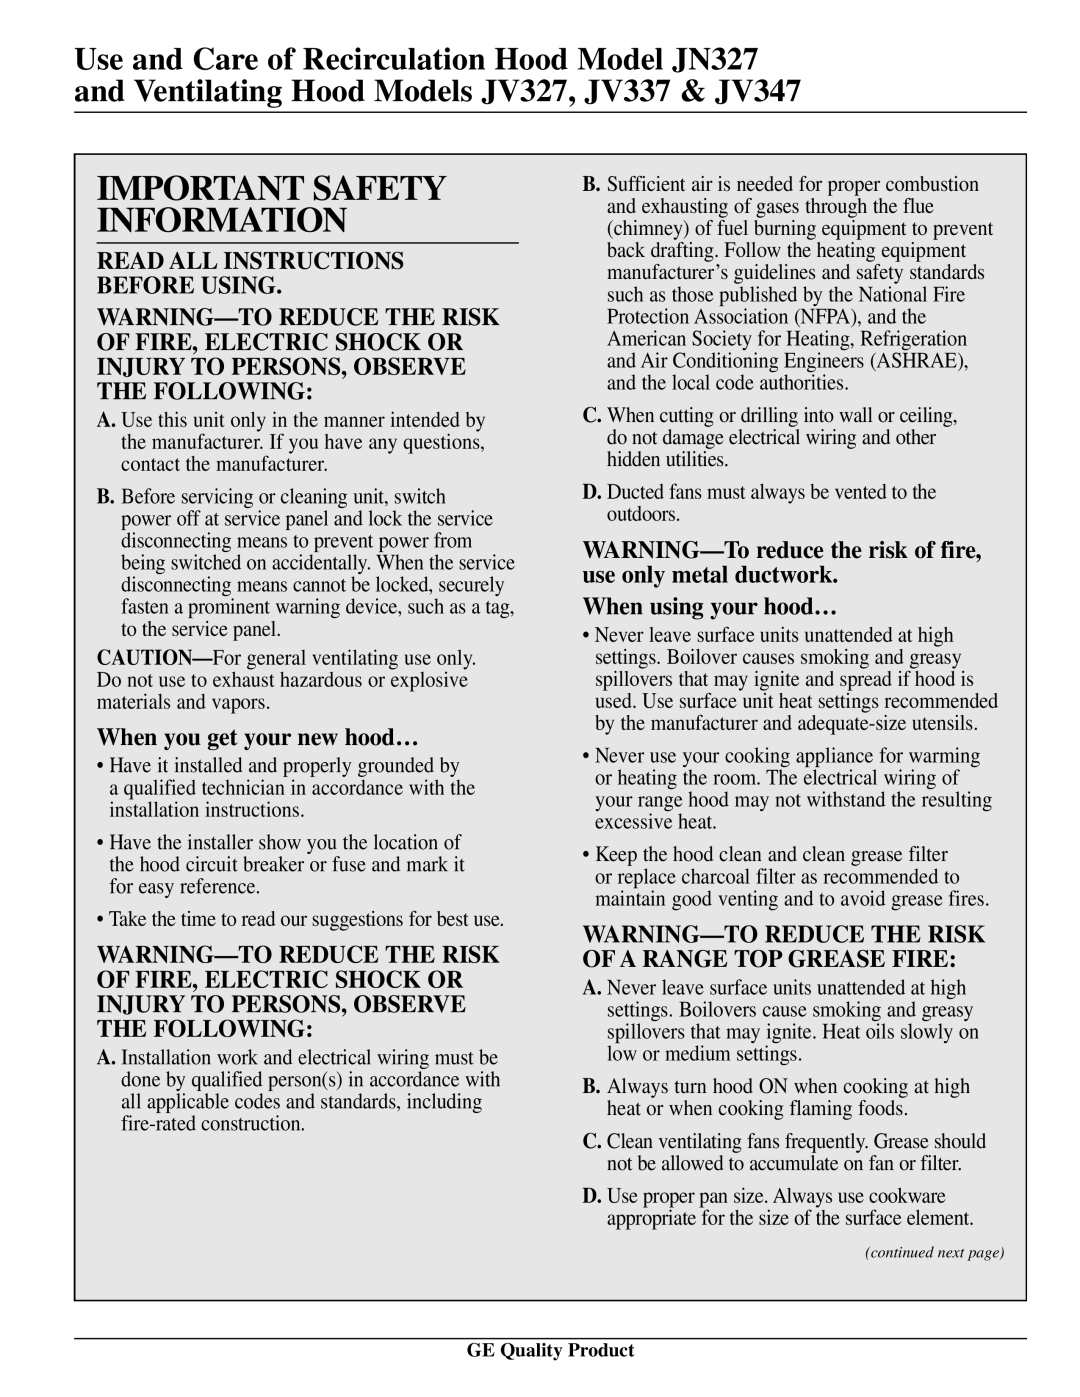 GE JN327, JV327, JV337, JV347 installation instructions Important Safety Information, When you get your new hood… 